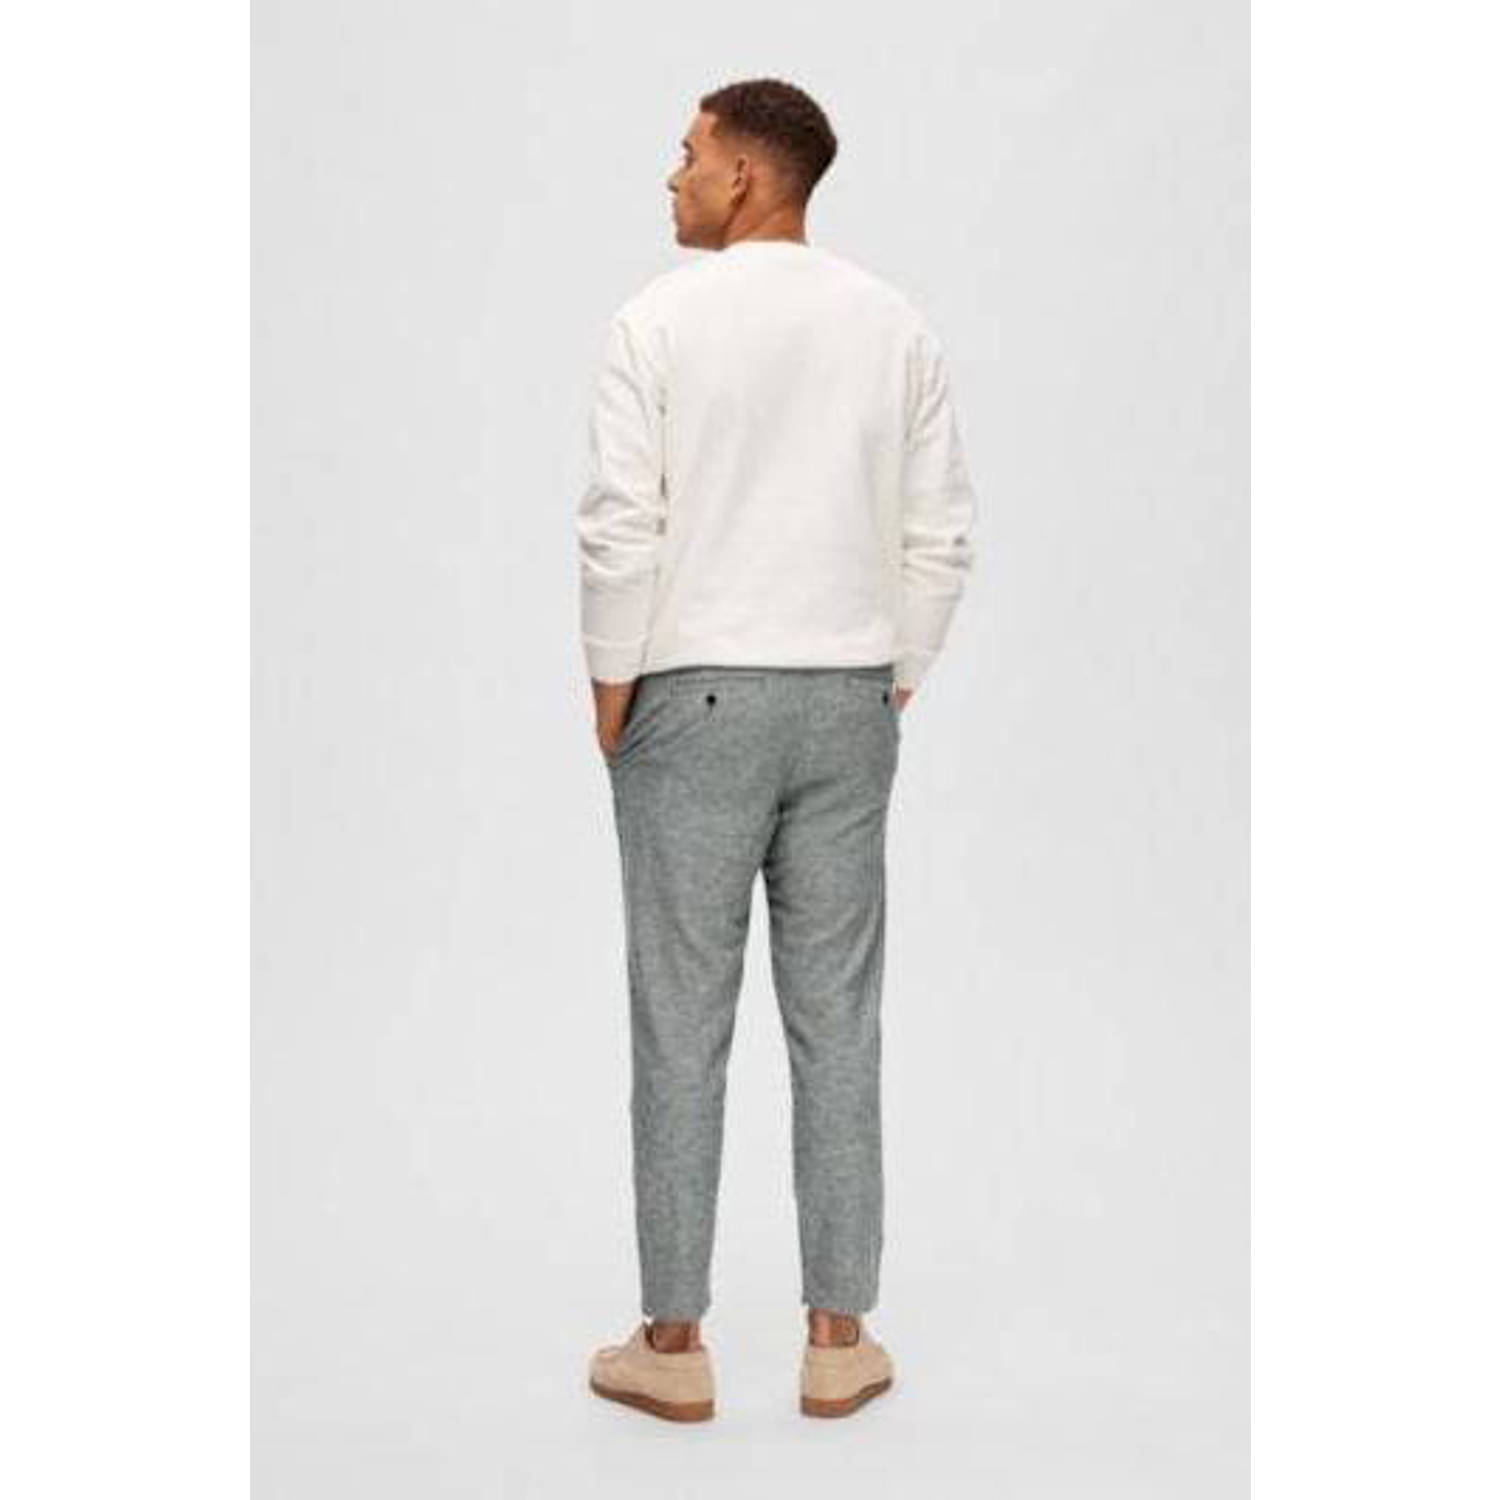 SELECTED HOMME relaxed chino BRODY grijs melange